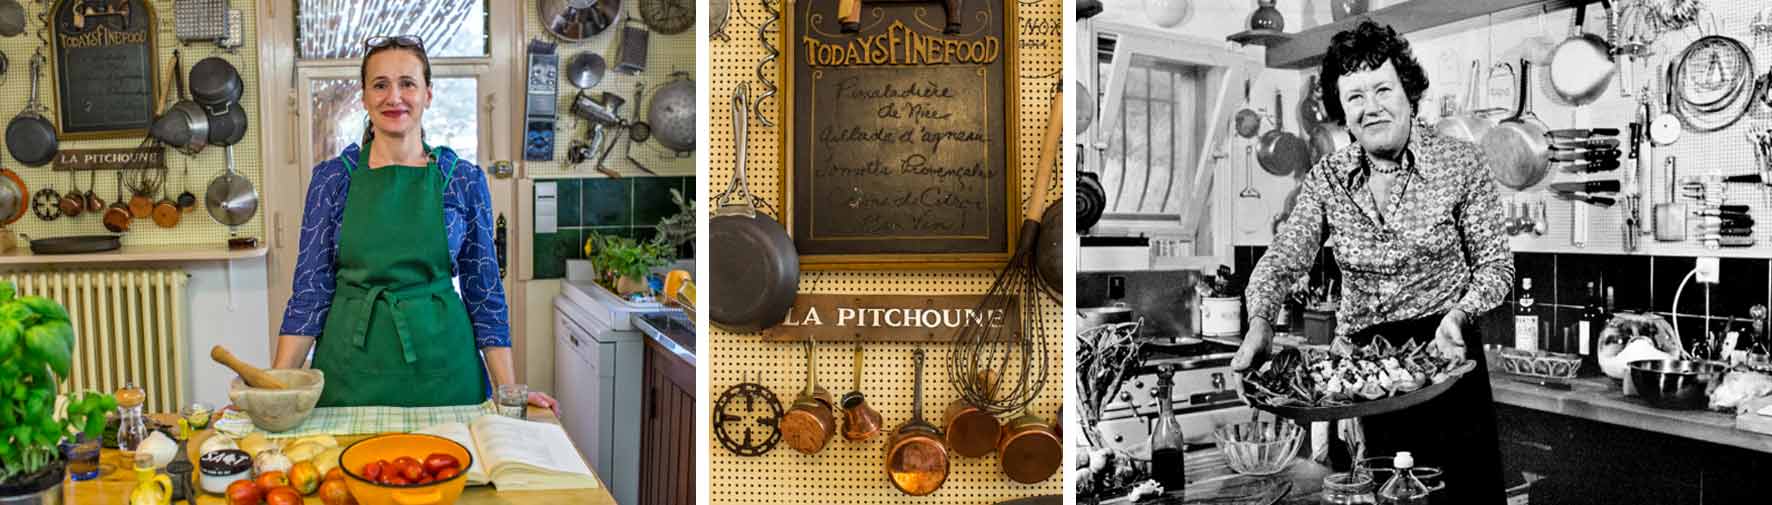 Julia Child's Provence Kitchen with Julia Moskin (left) and Julia Child (right)